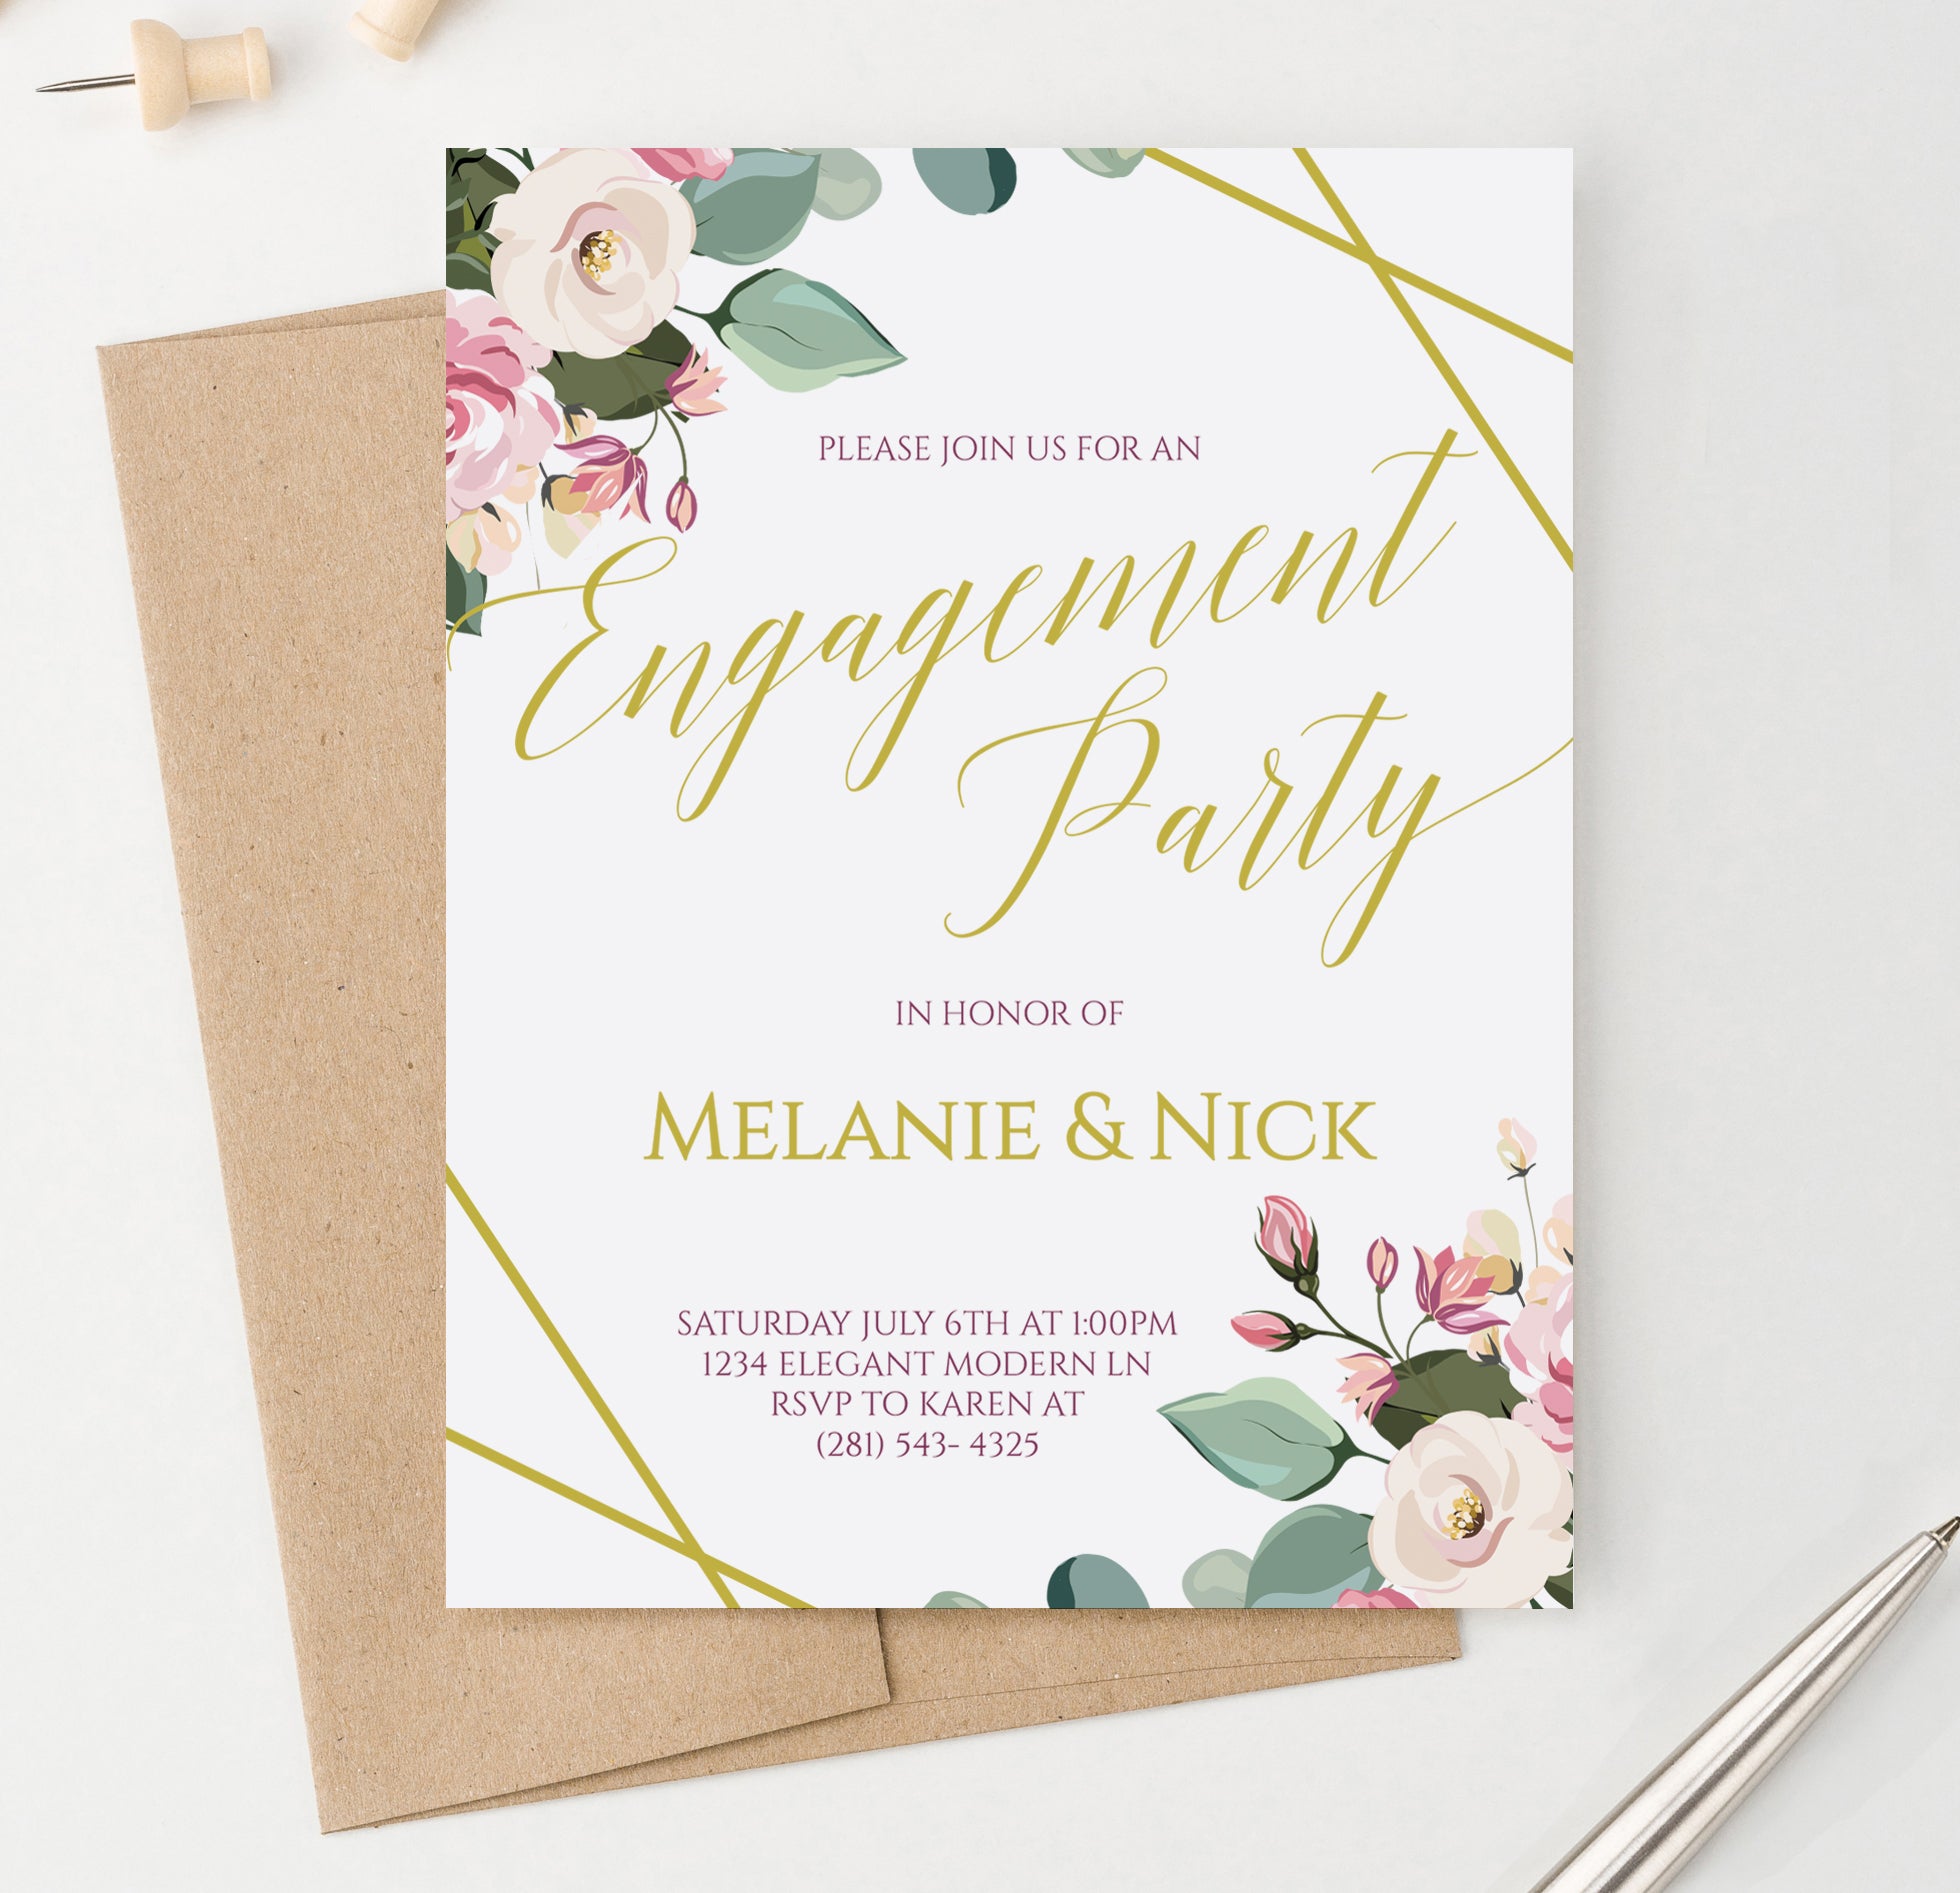 Personalized Modern Engagement Party Invitations With Floral Corners